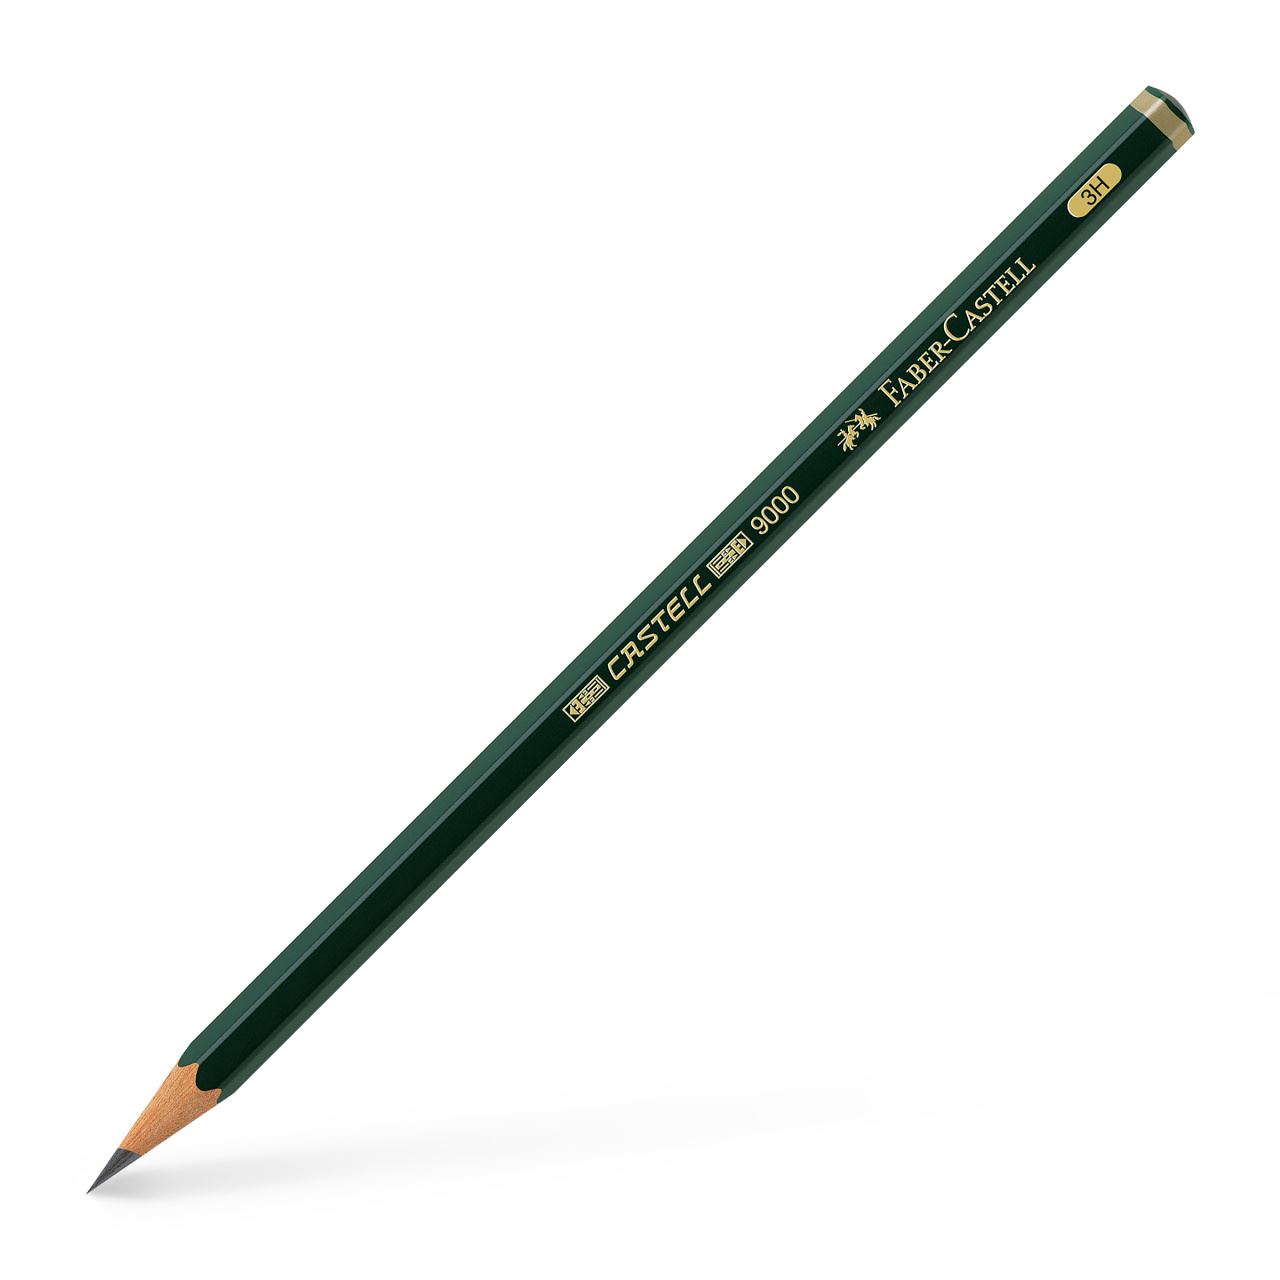 Faber-Castell - Crayon graphite Castell 9000 3H